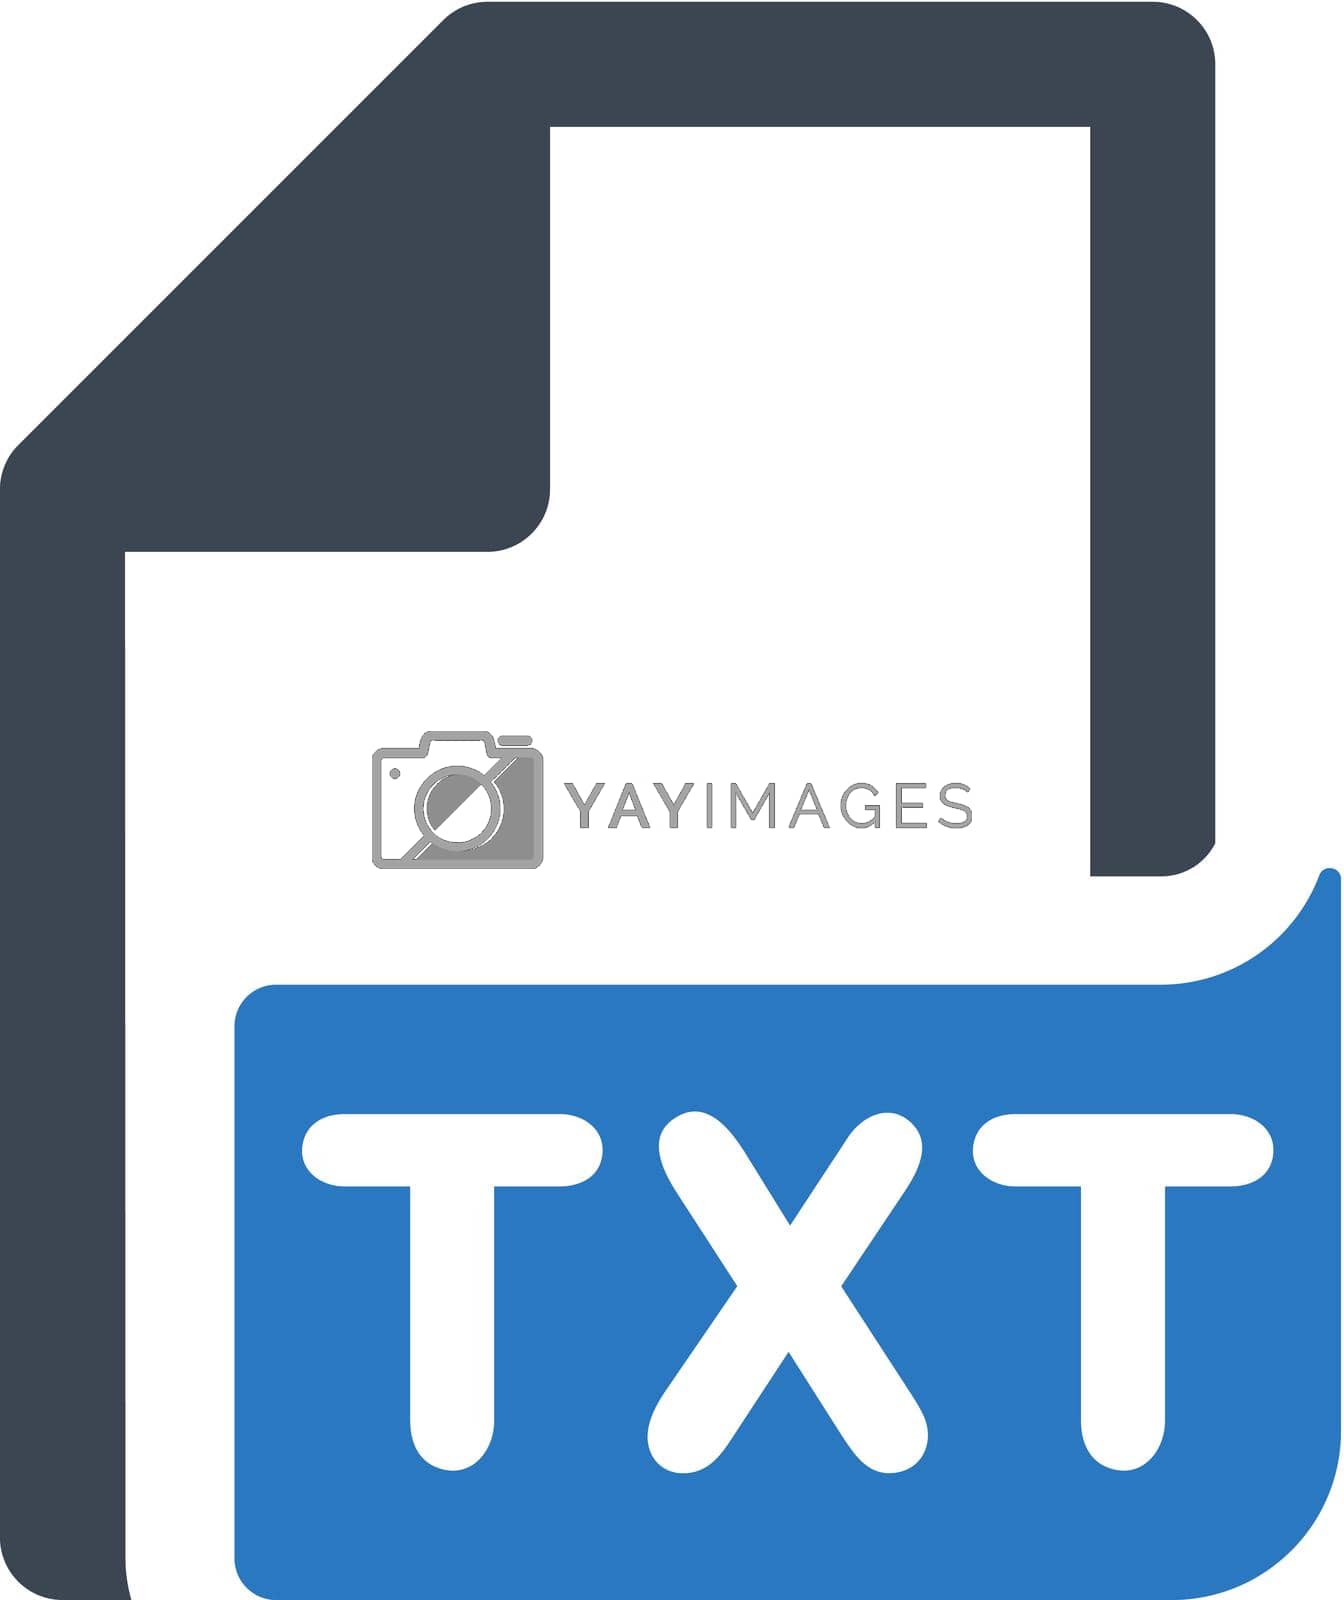 Royalty free image of Text document icon by delwar018